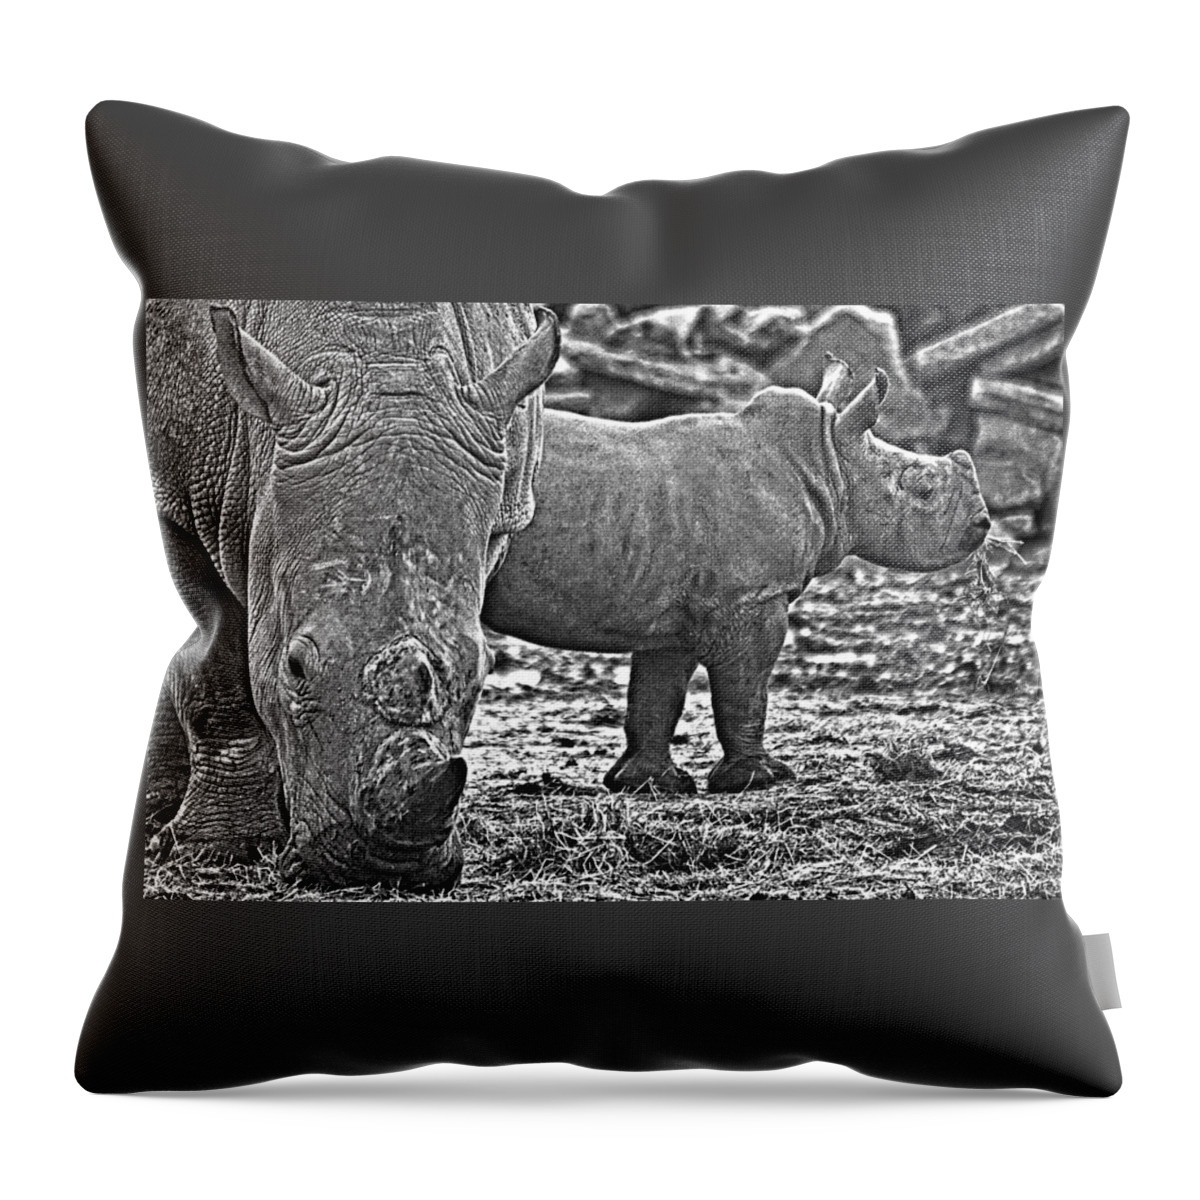 Rhinoceros Images Throw Pillow featuring the digital art Little Big Horn by David Davies